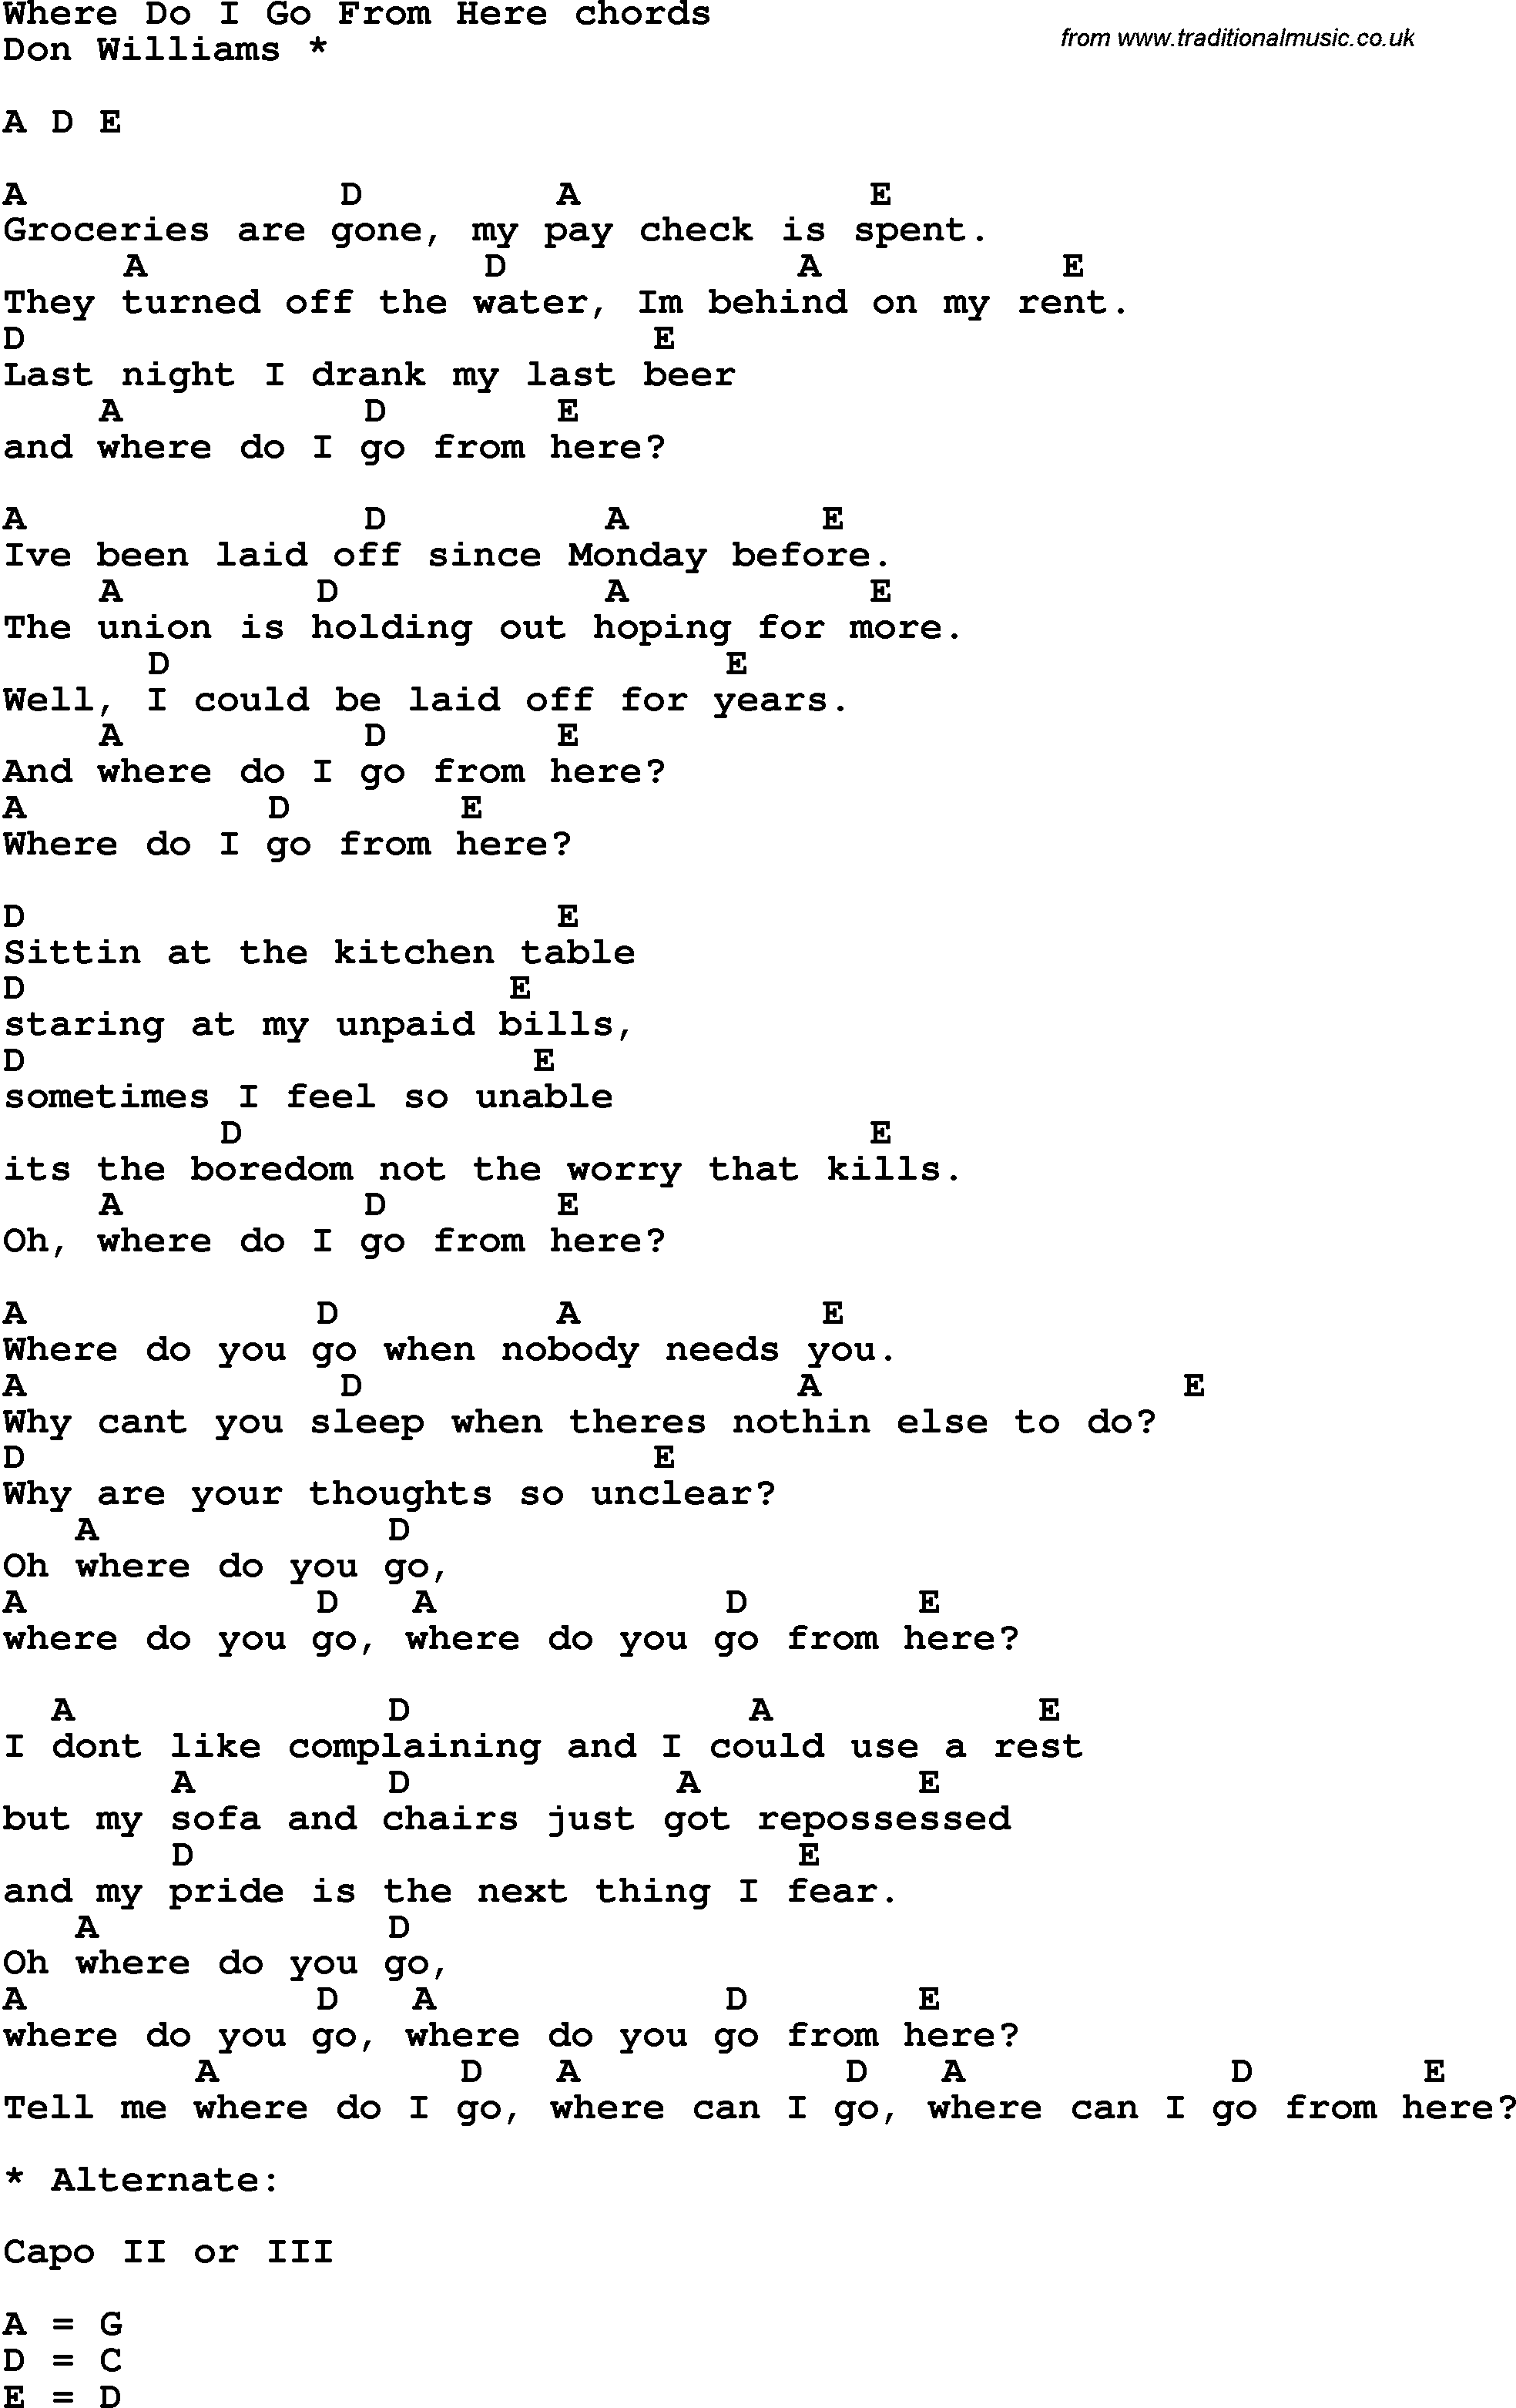 Song Lyrics with guitar chords for Where Do I Go From Here